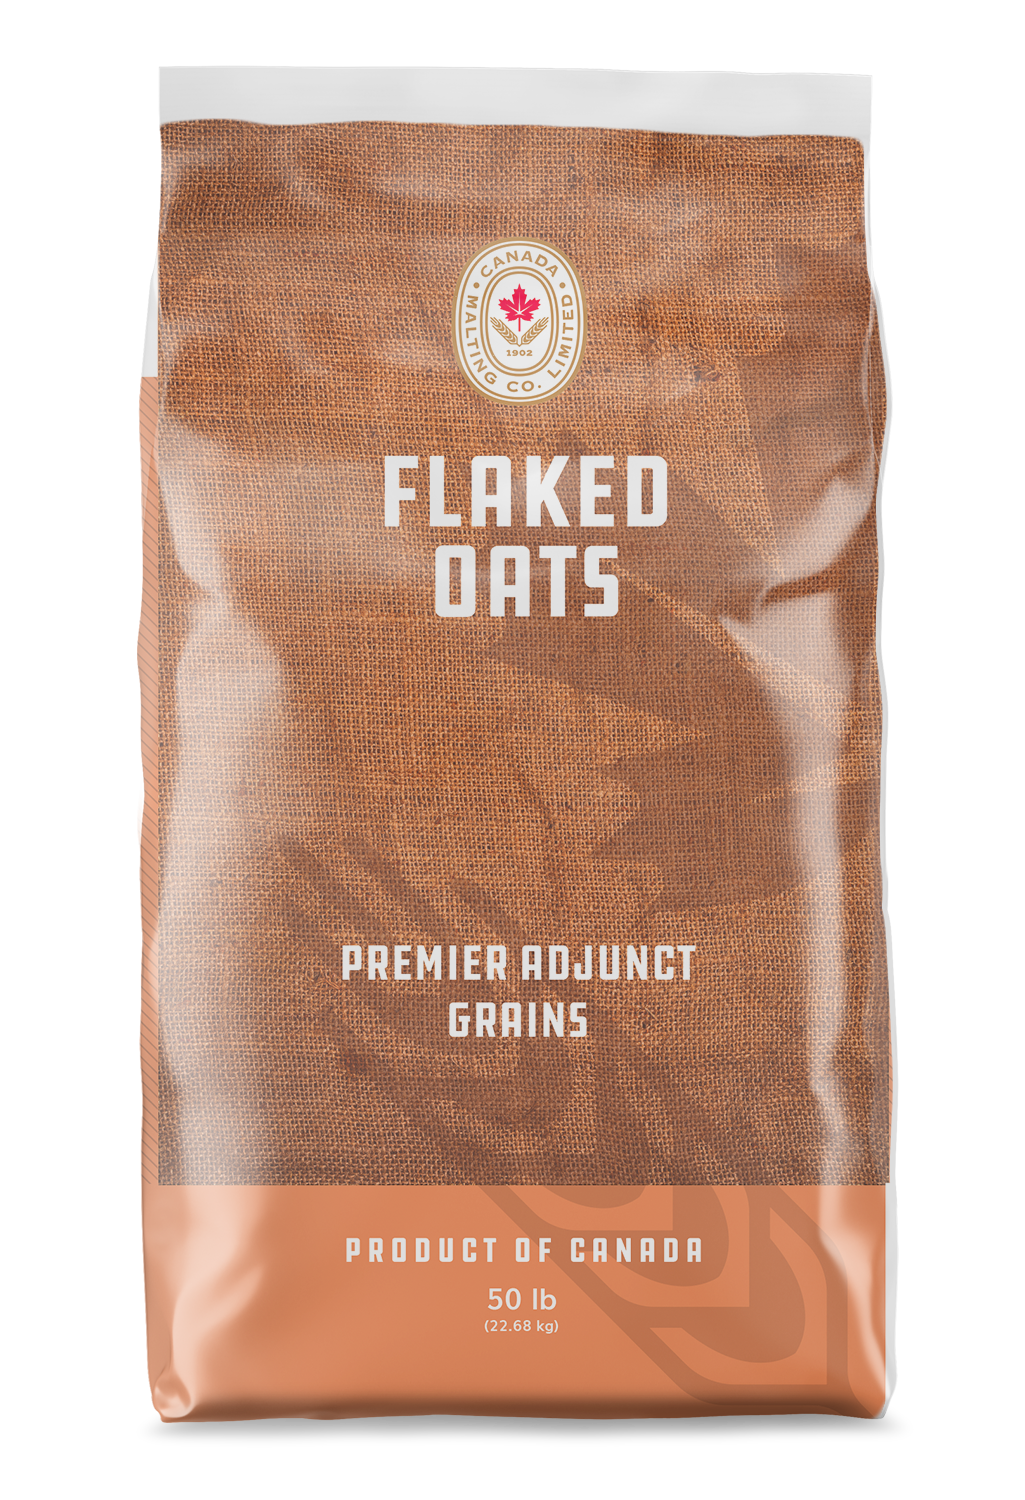 Flaked Oats package